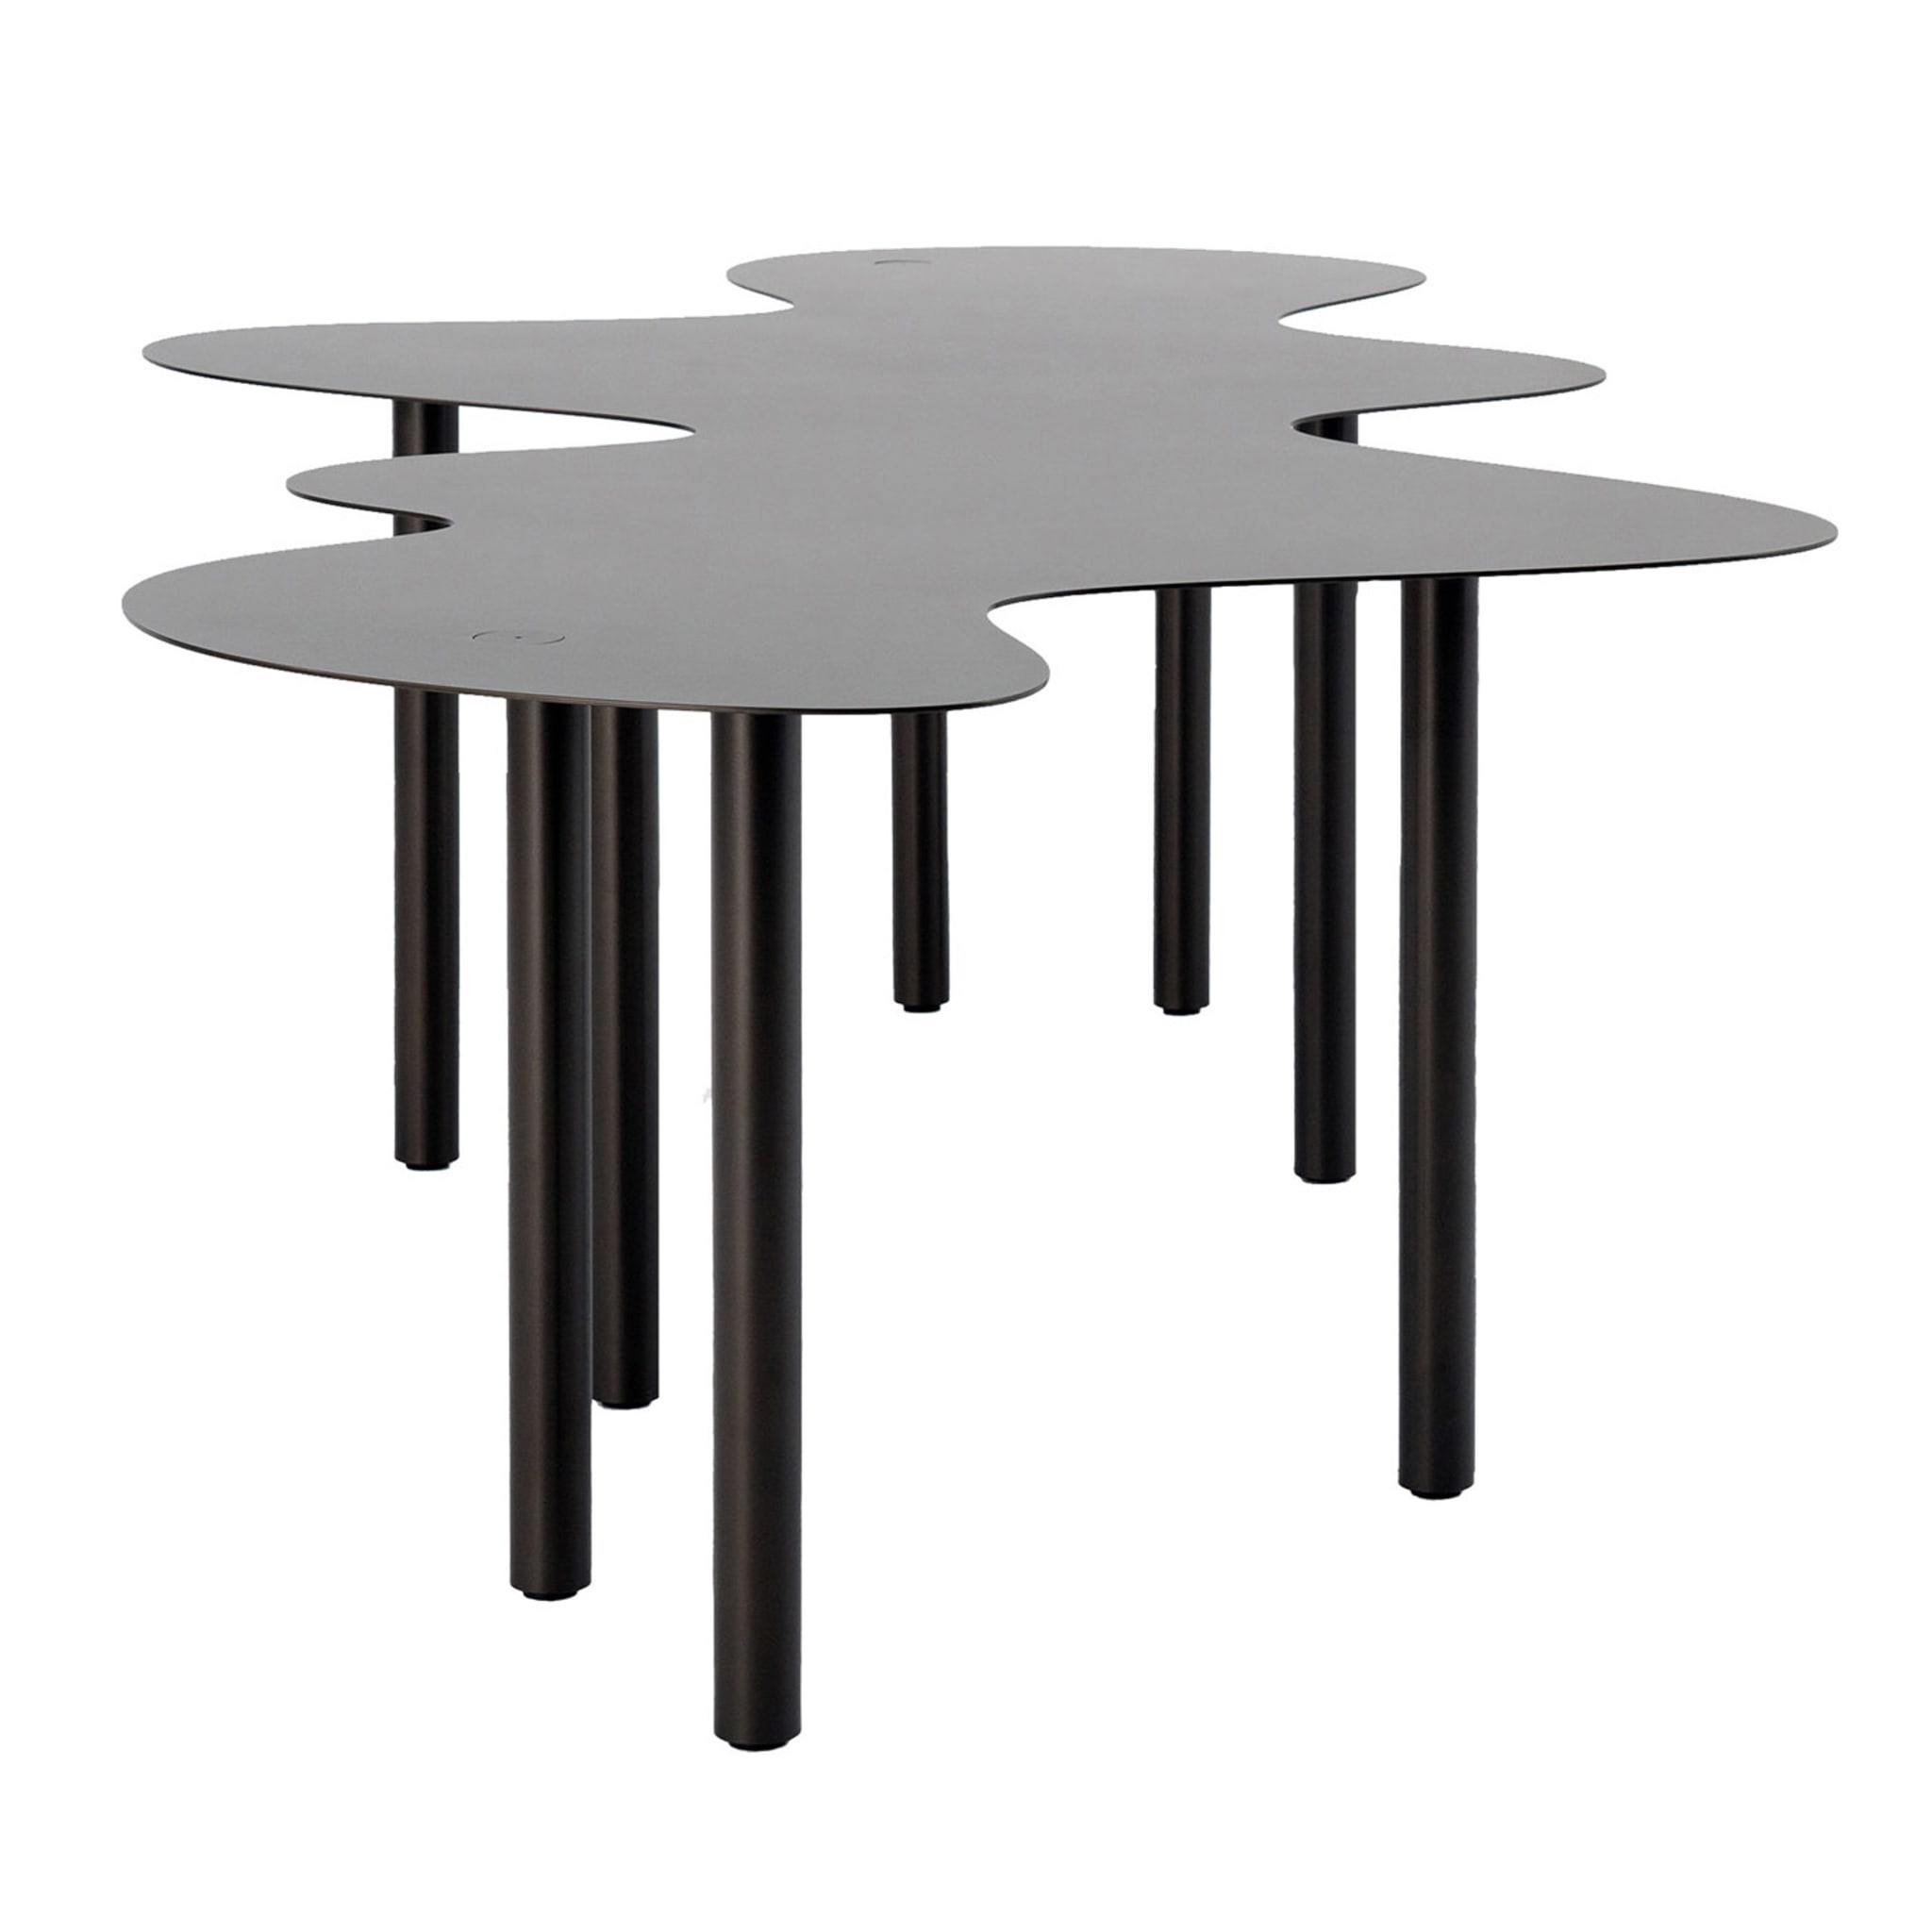 Nuvola 01 Dining Table by Mario Cucinella - Main view